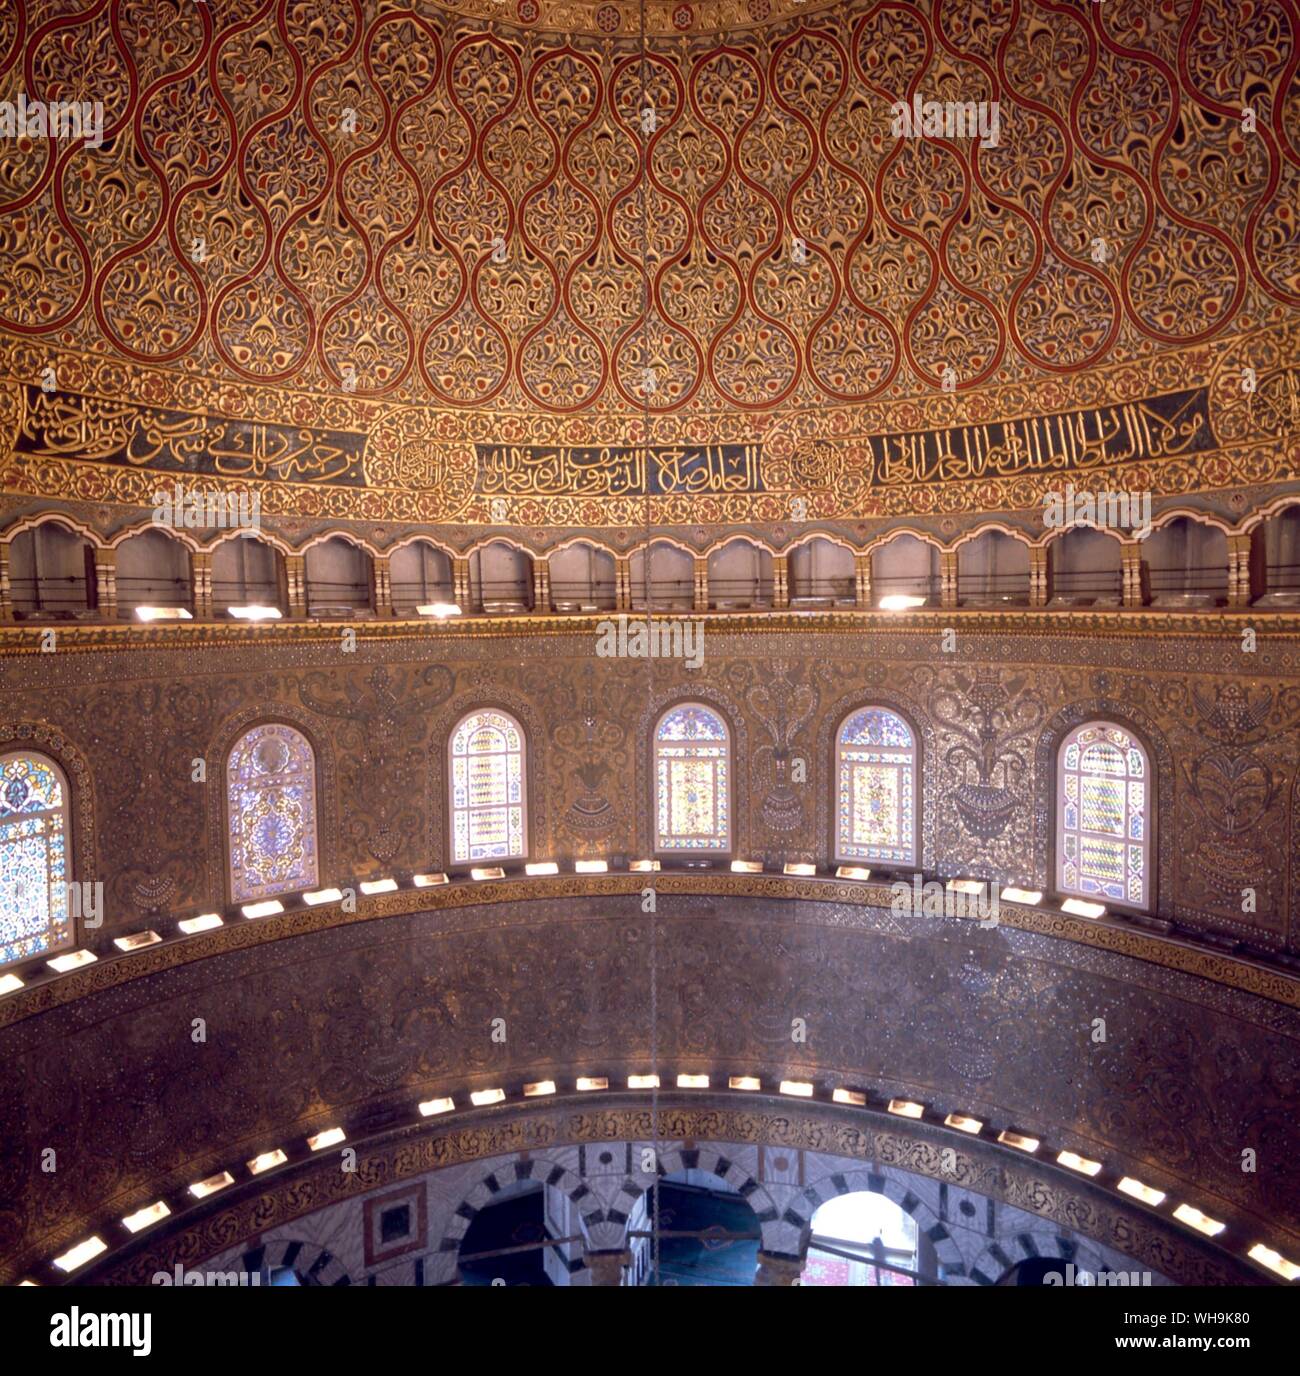 Jerusalem Interior Of Dome Of The Rock Stock Photo